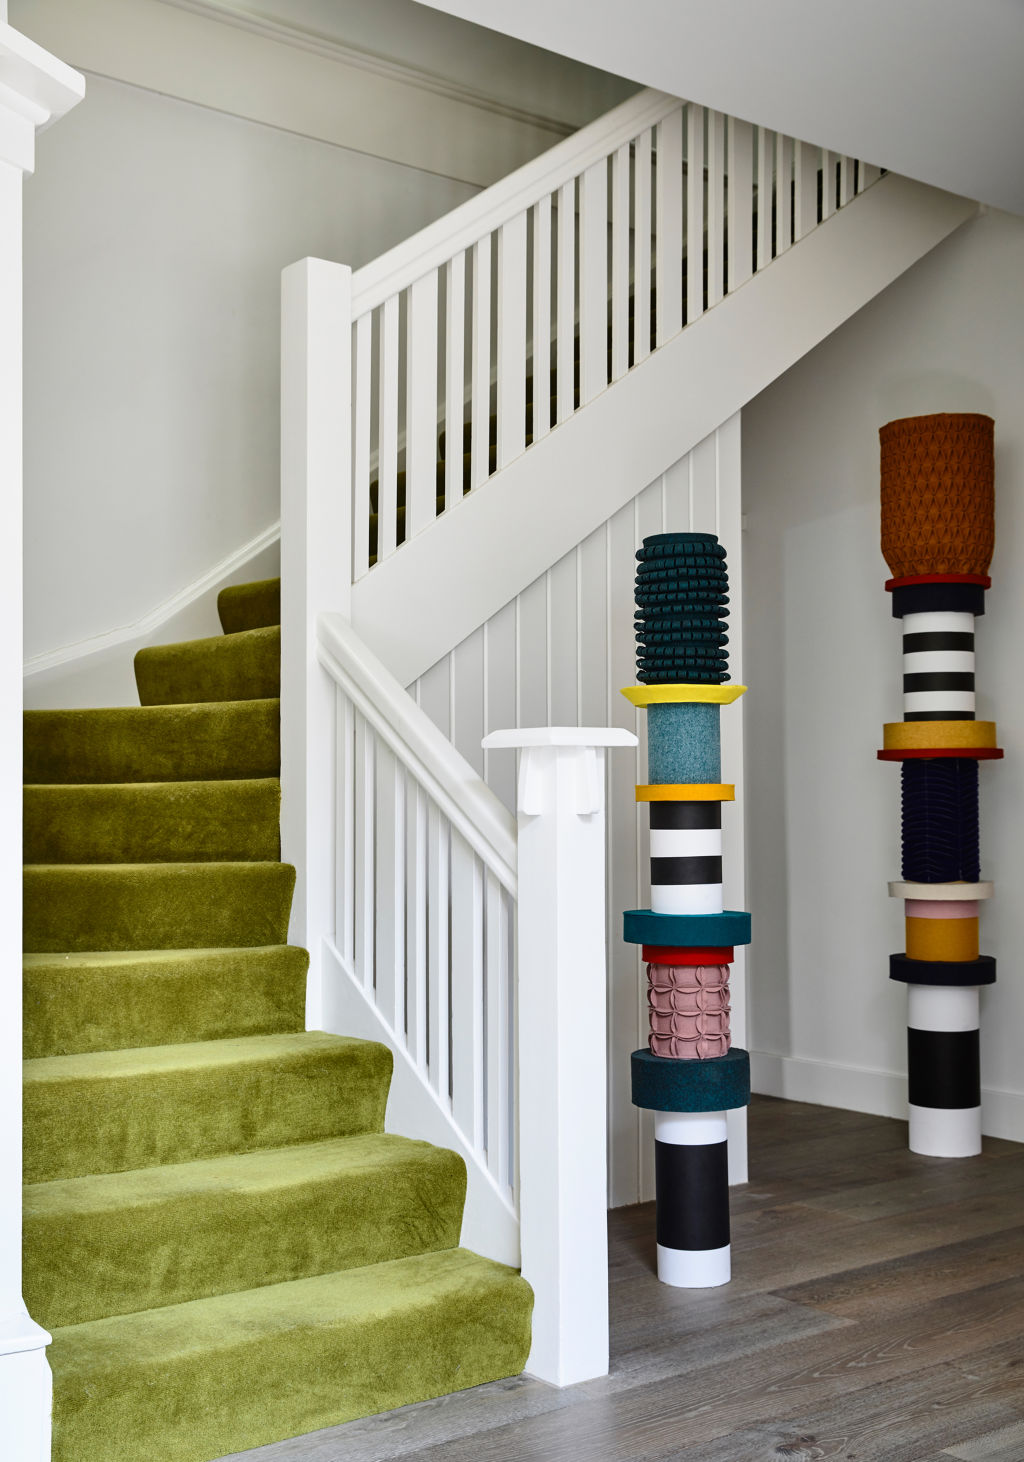 Doherty encourages the introduction of colour in unexpected ways, as seen in this pop of green carpet on the staircase. Photo: Derek Swalwell